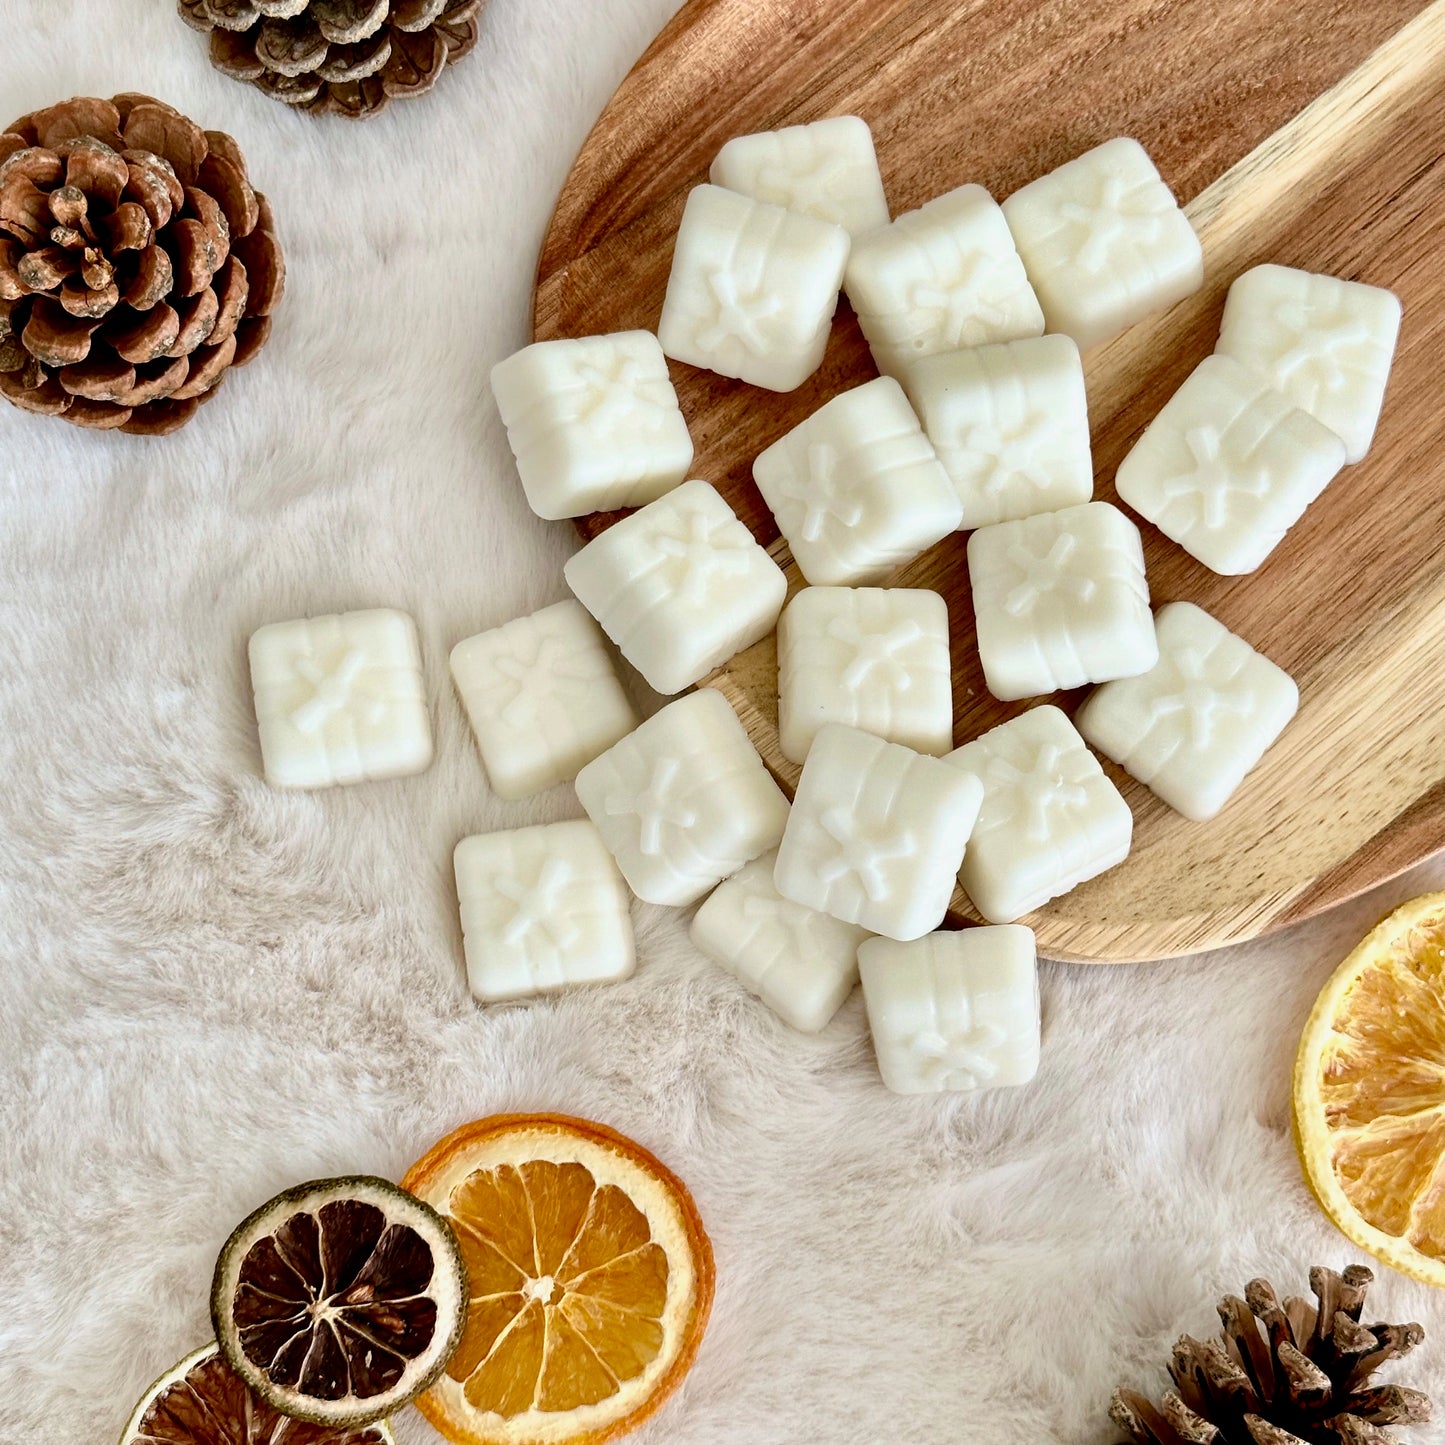 A pile of Gingerbread wax melts on a wooden board.